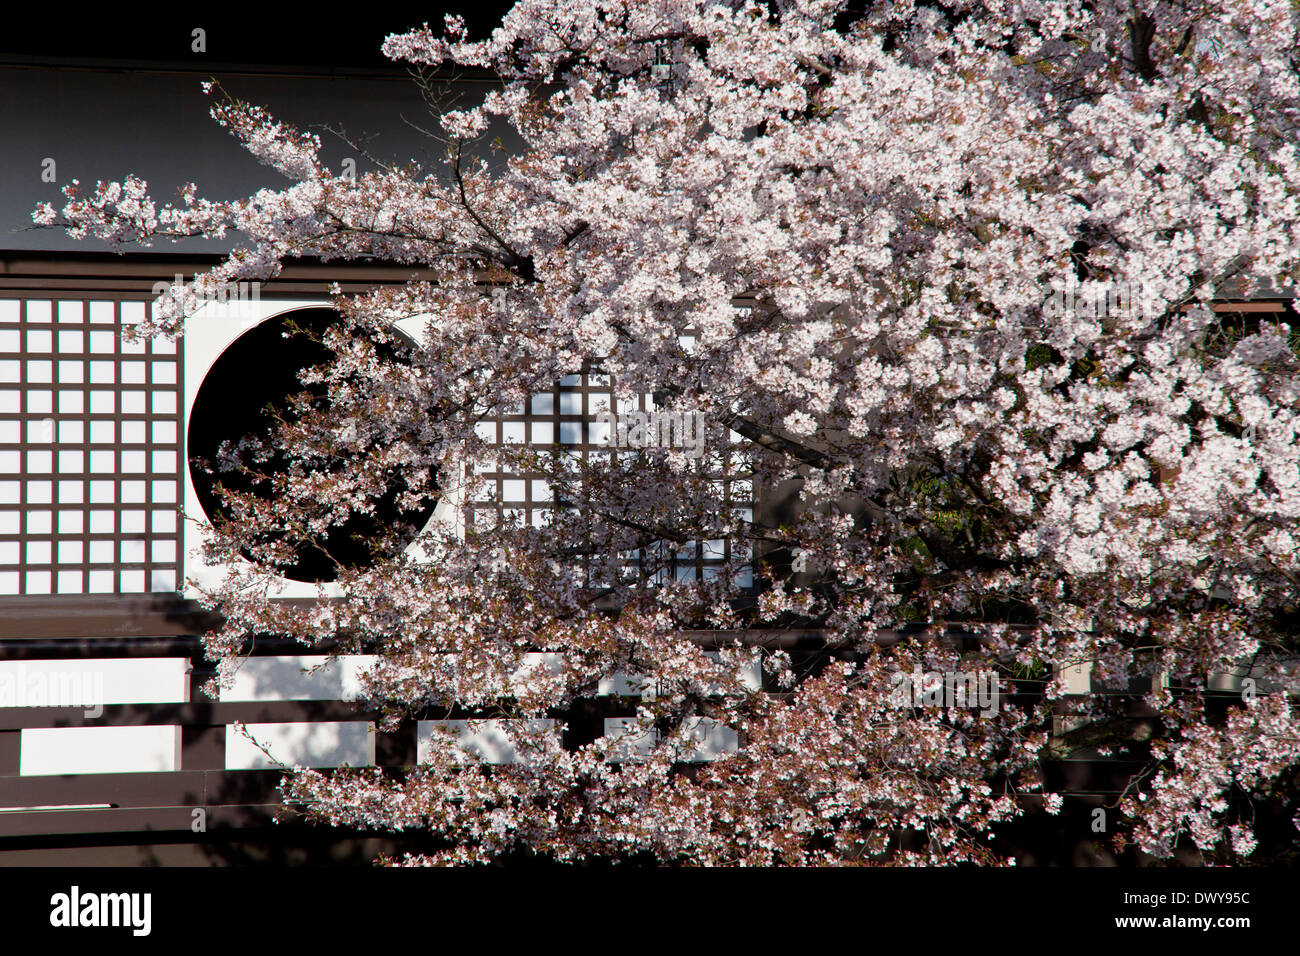 Cherry blossoms and temple building, Kyoto Prefecture, Japan Stock Photo